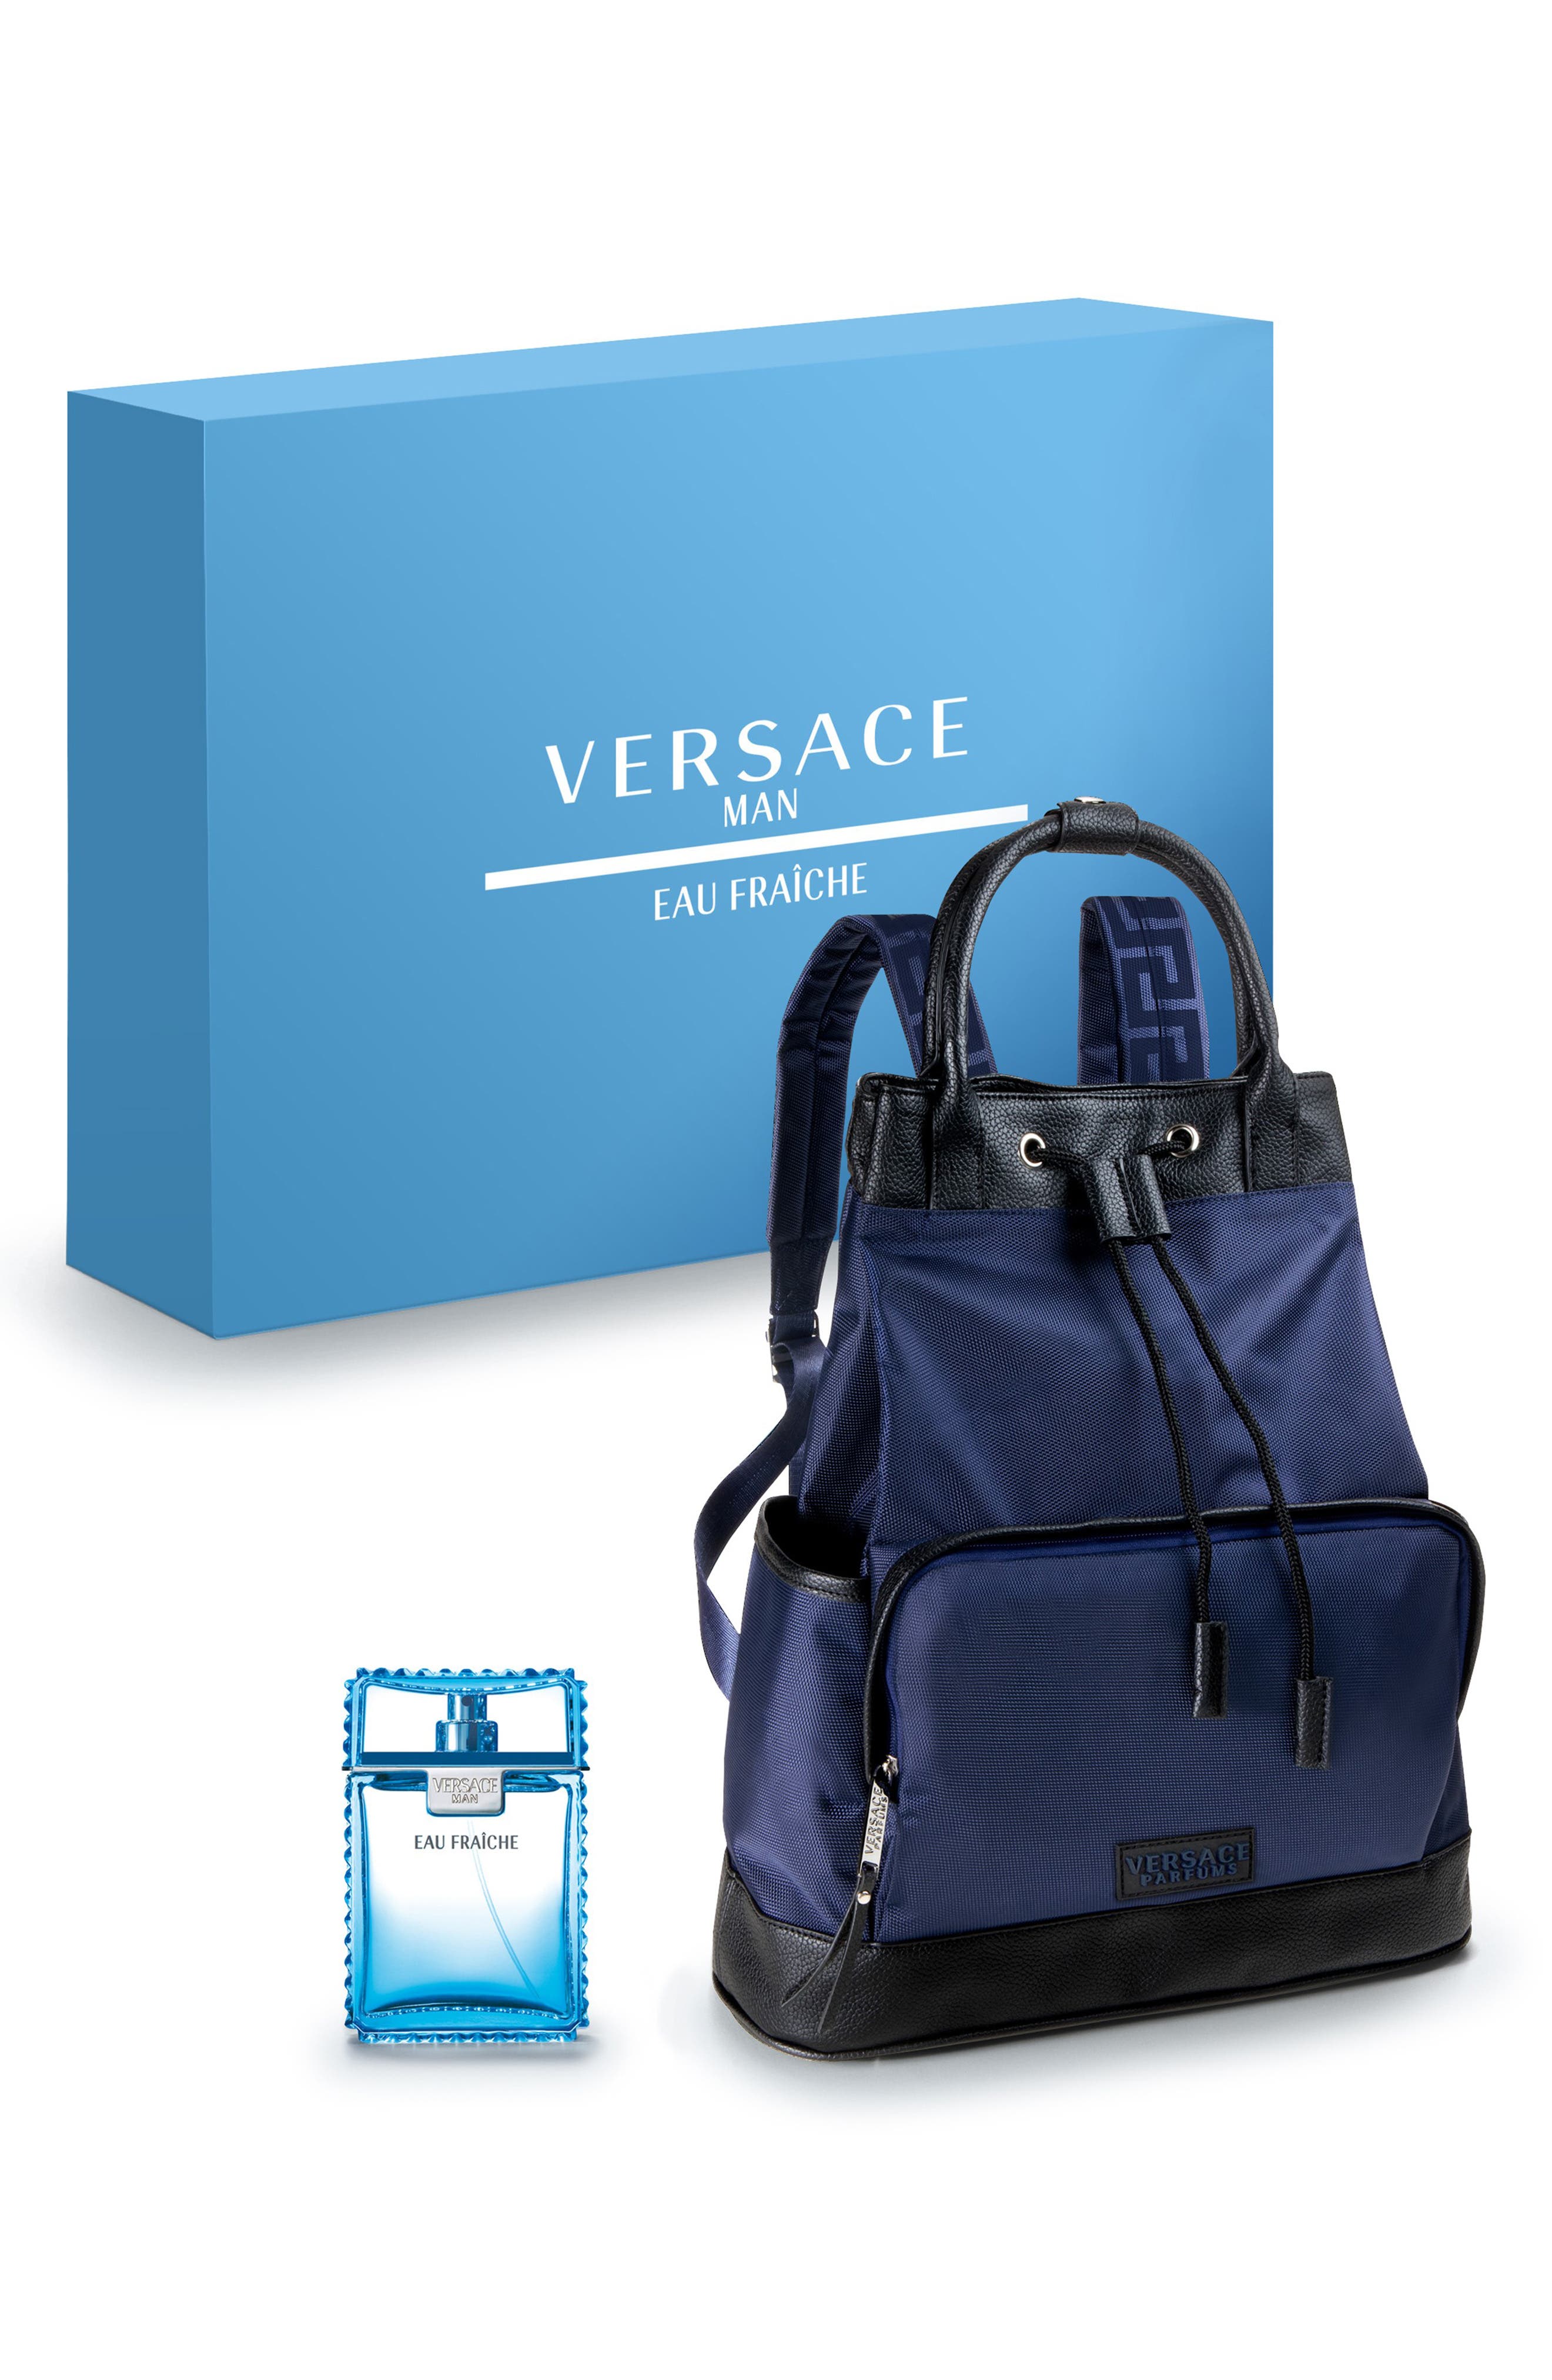 versace men's cologne with backpack